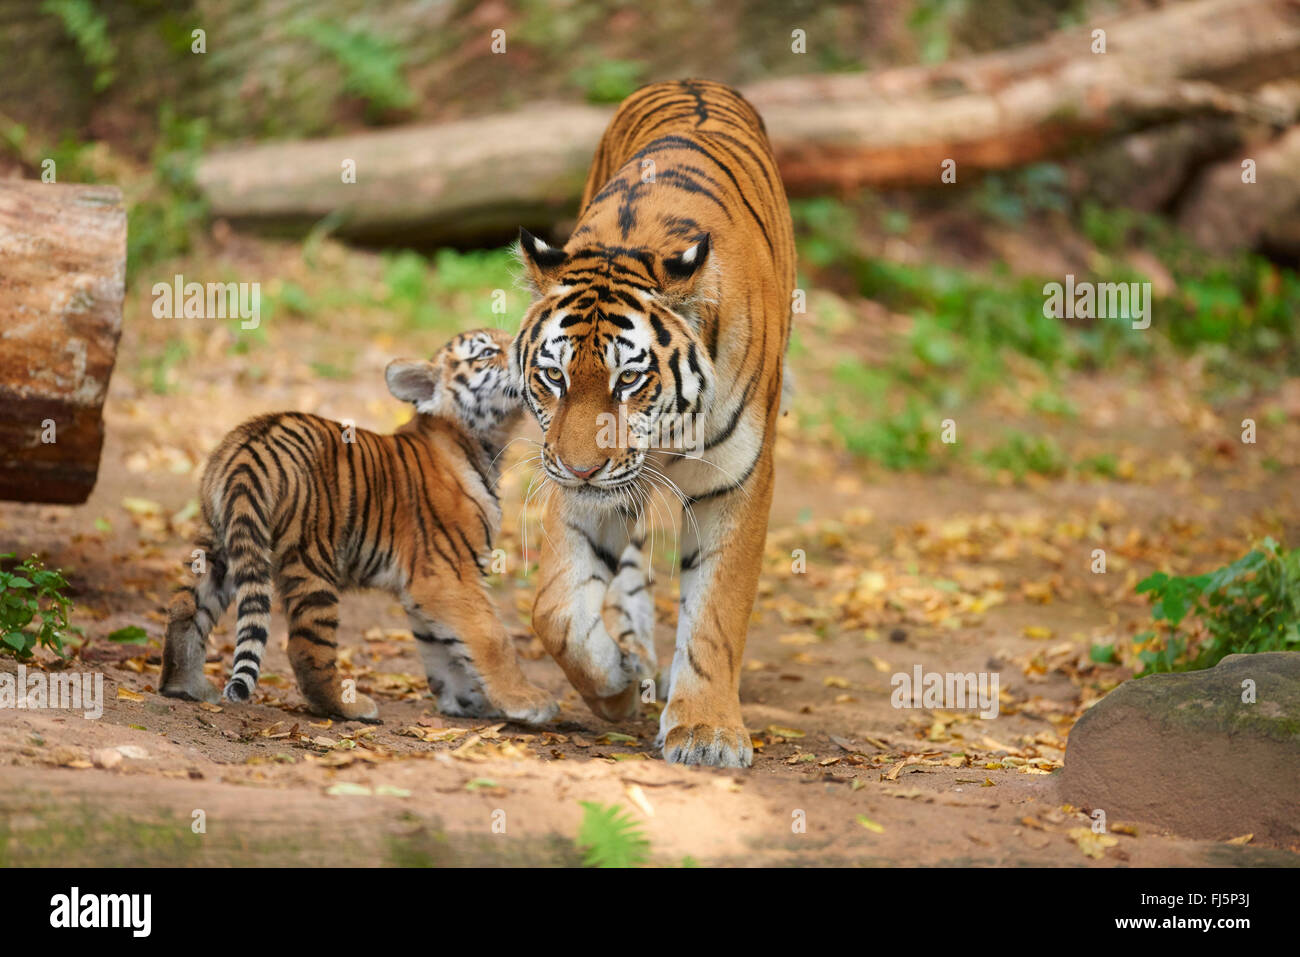 Siberian tiger, Amurian tiger (Panthera tigris altaica), female with cub in outdoor enclosure Stock Photo